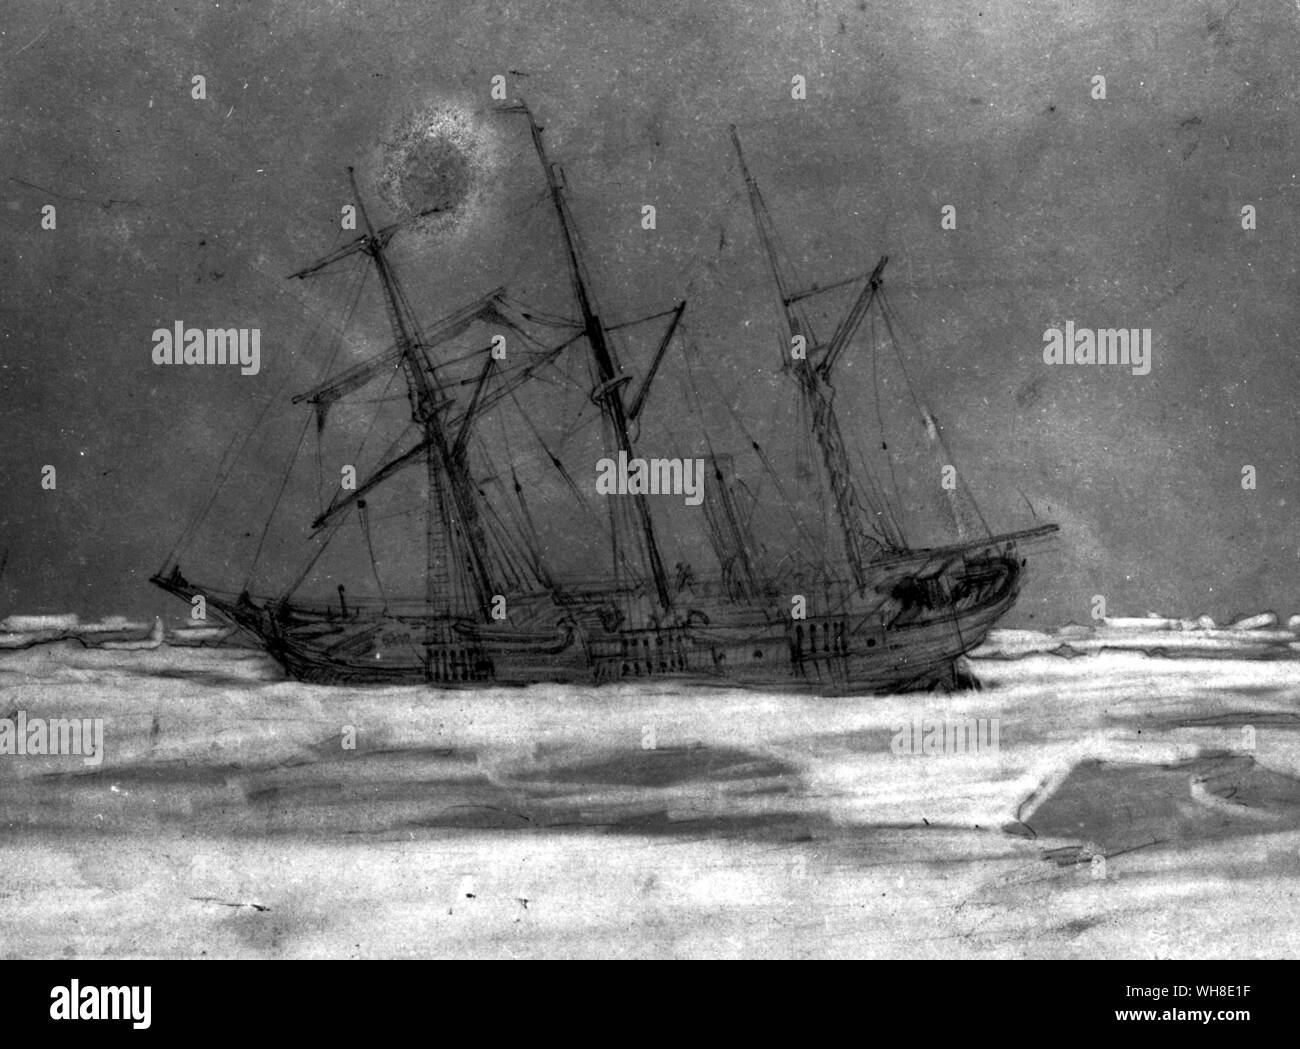 Antarctic Expedition 1914-16, the ship Endurance breaking up, recovered from the wreck, by George Maiston. From Antarctica: The Last Continent by Ian Cameron page 59. Stock Photo